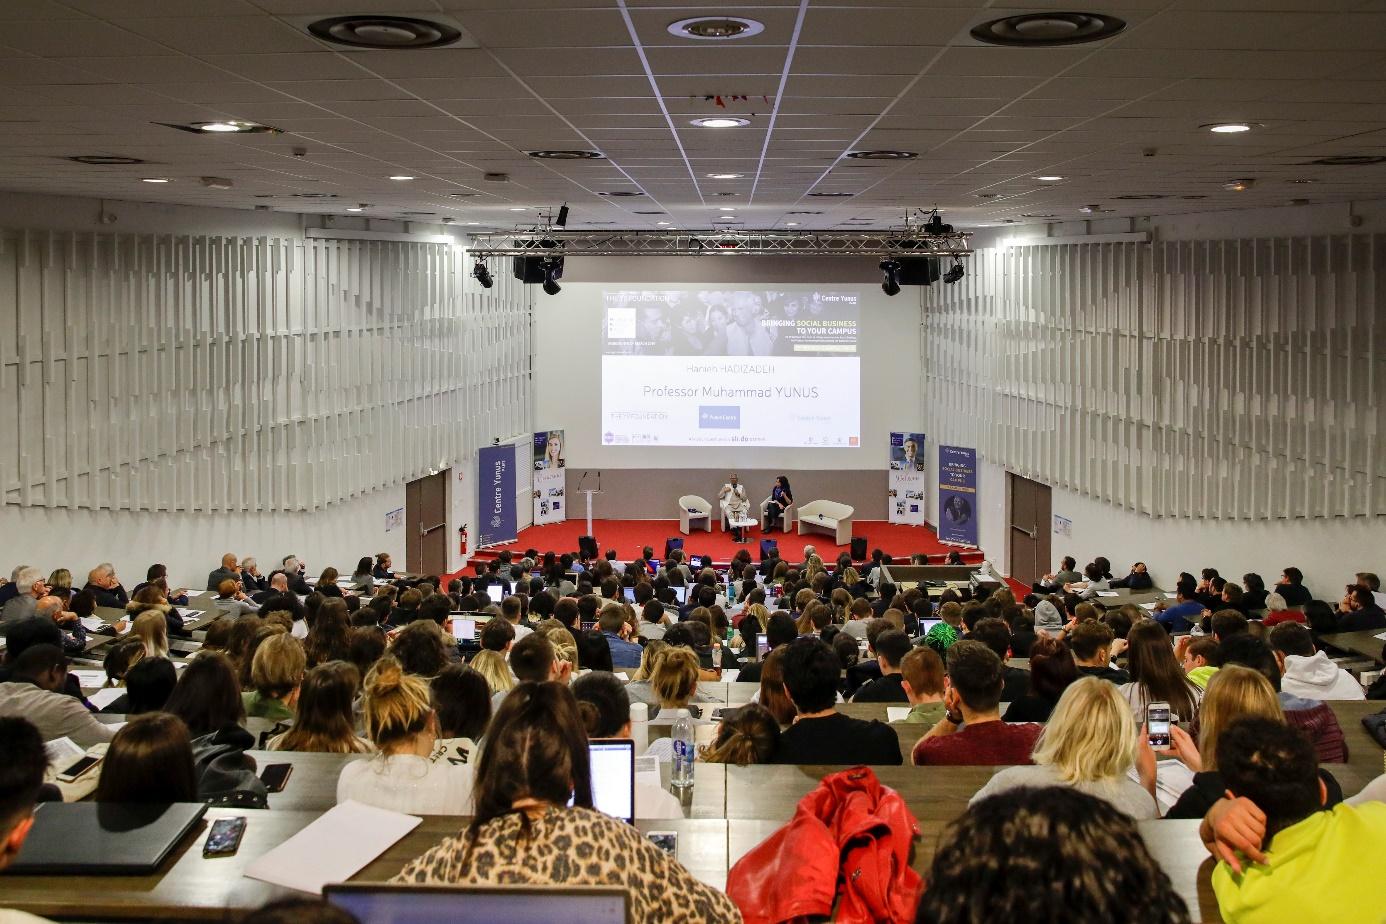 A Yunus Center at Montpellier Business School to help solve the big challenges in our society